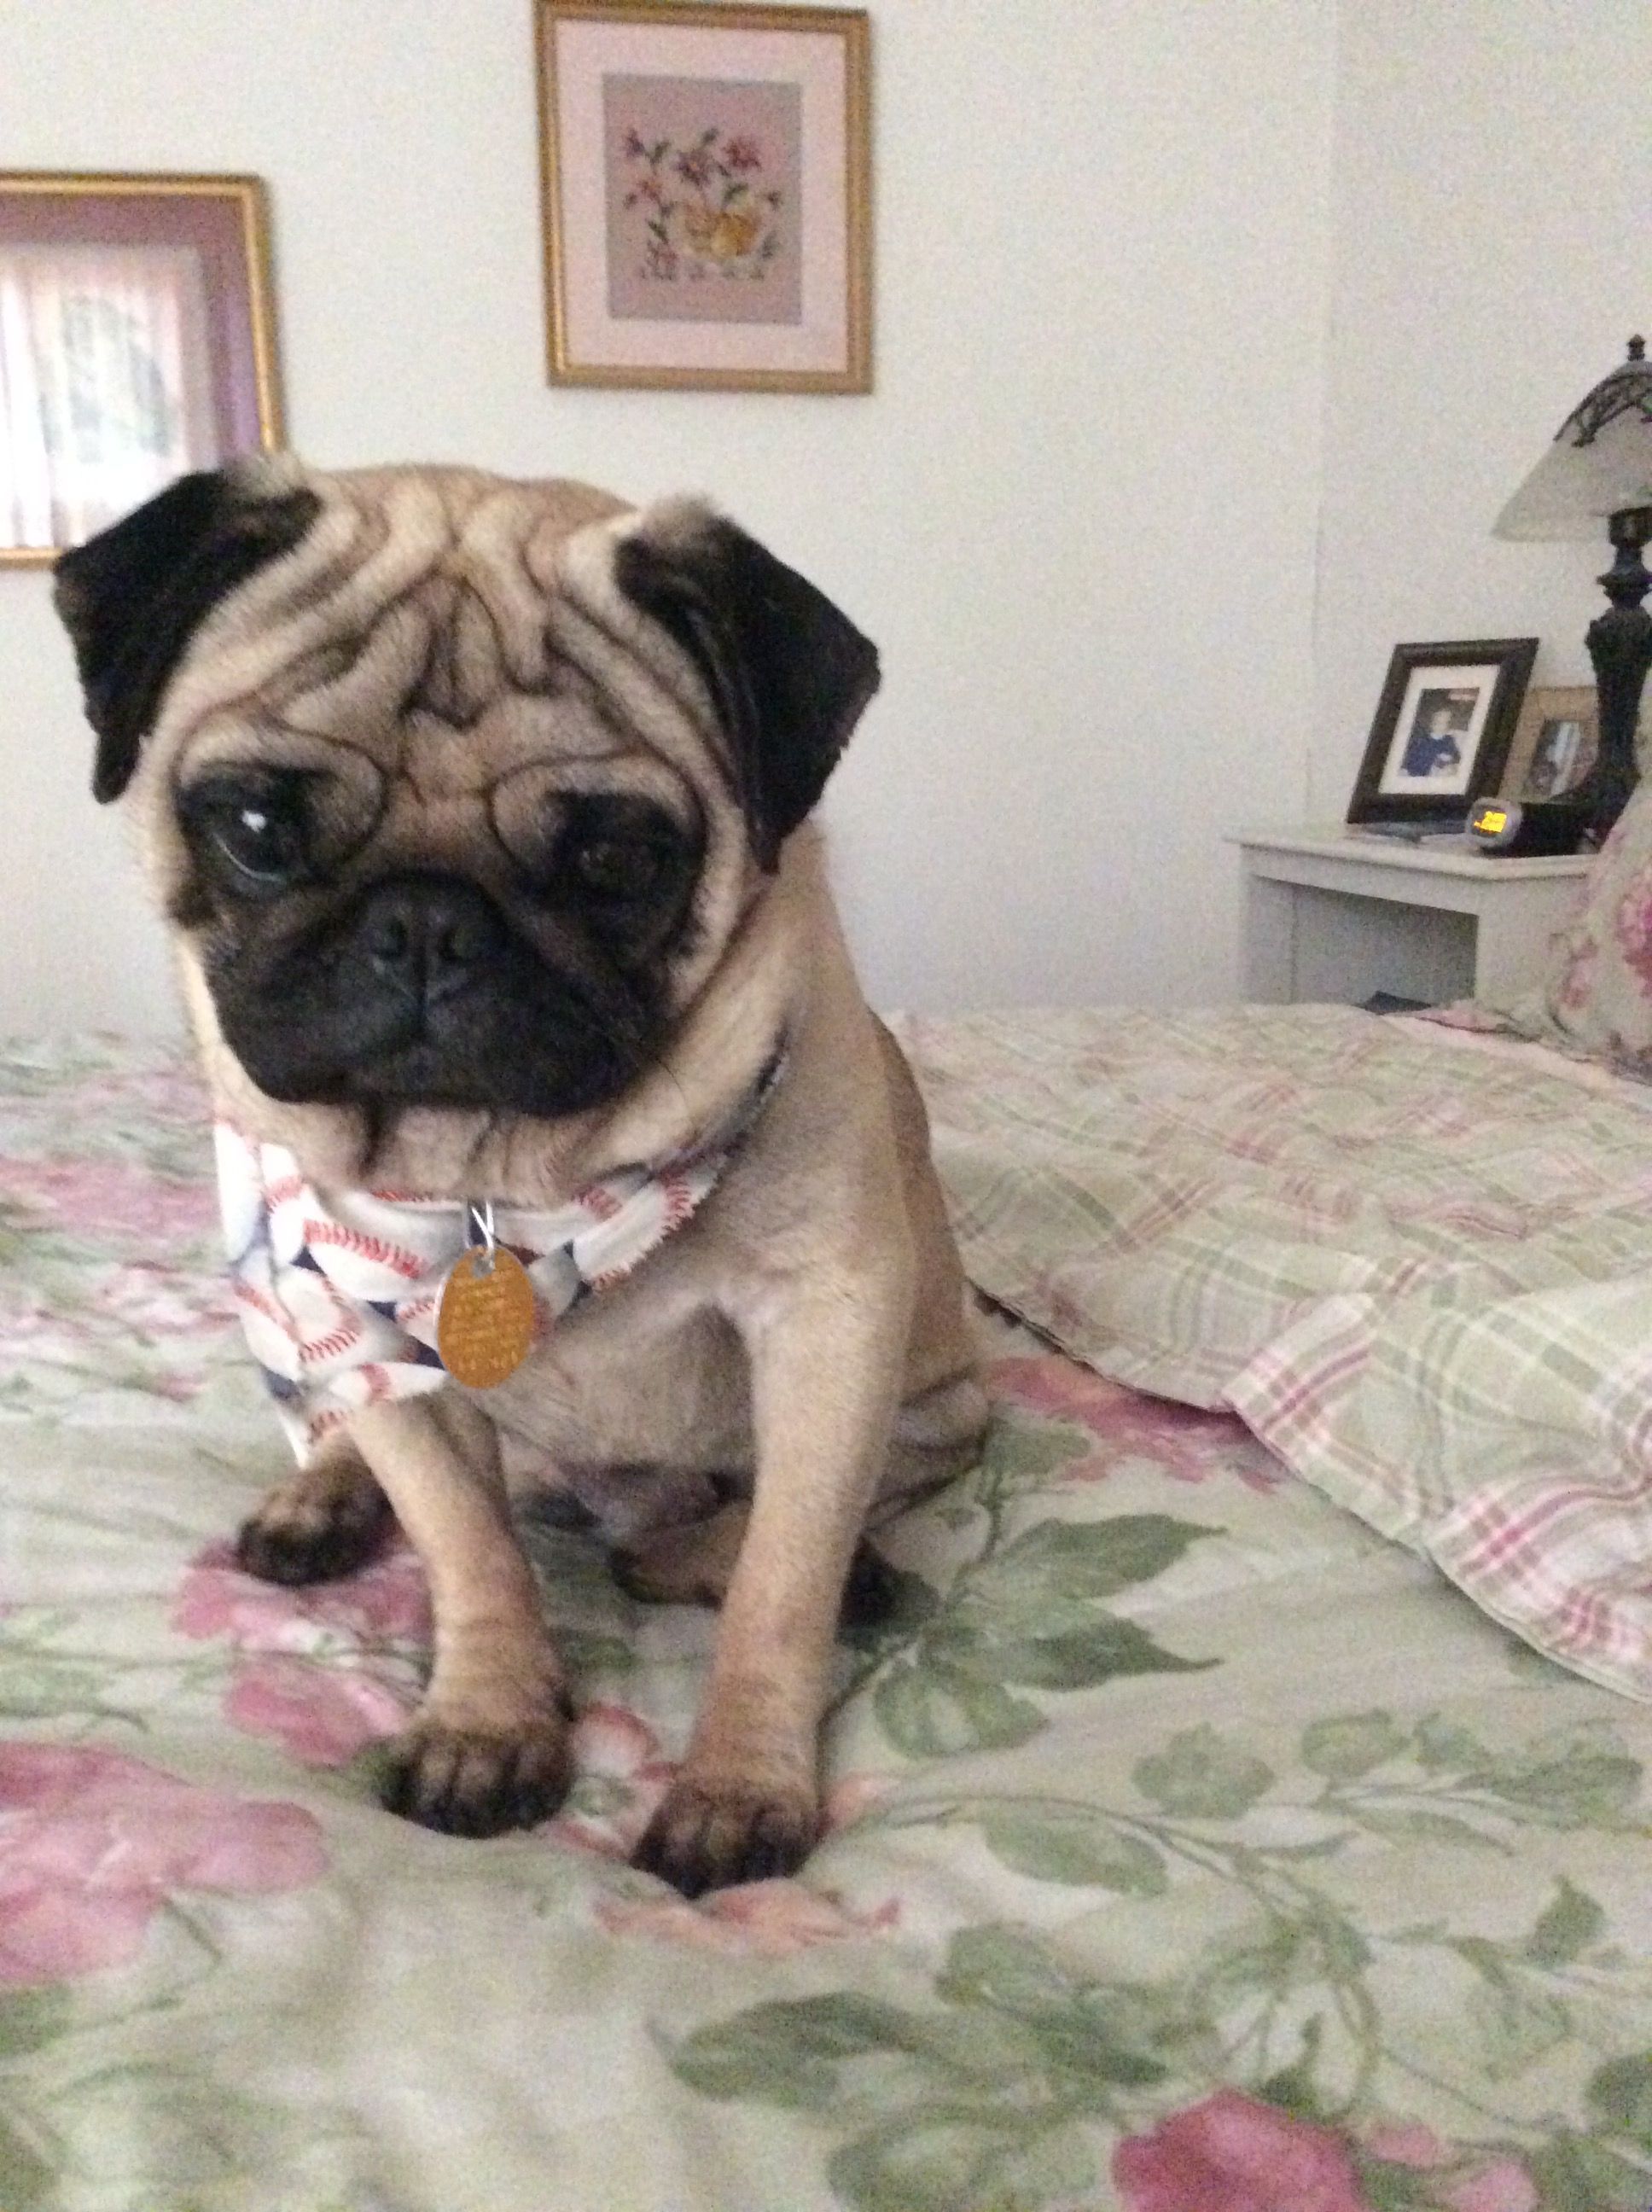 Lonely Pug ~ what a sweetheart -my granddaughter would love him ...